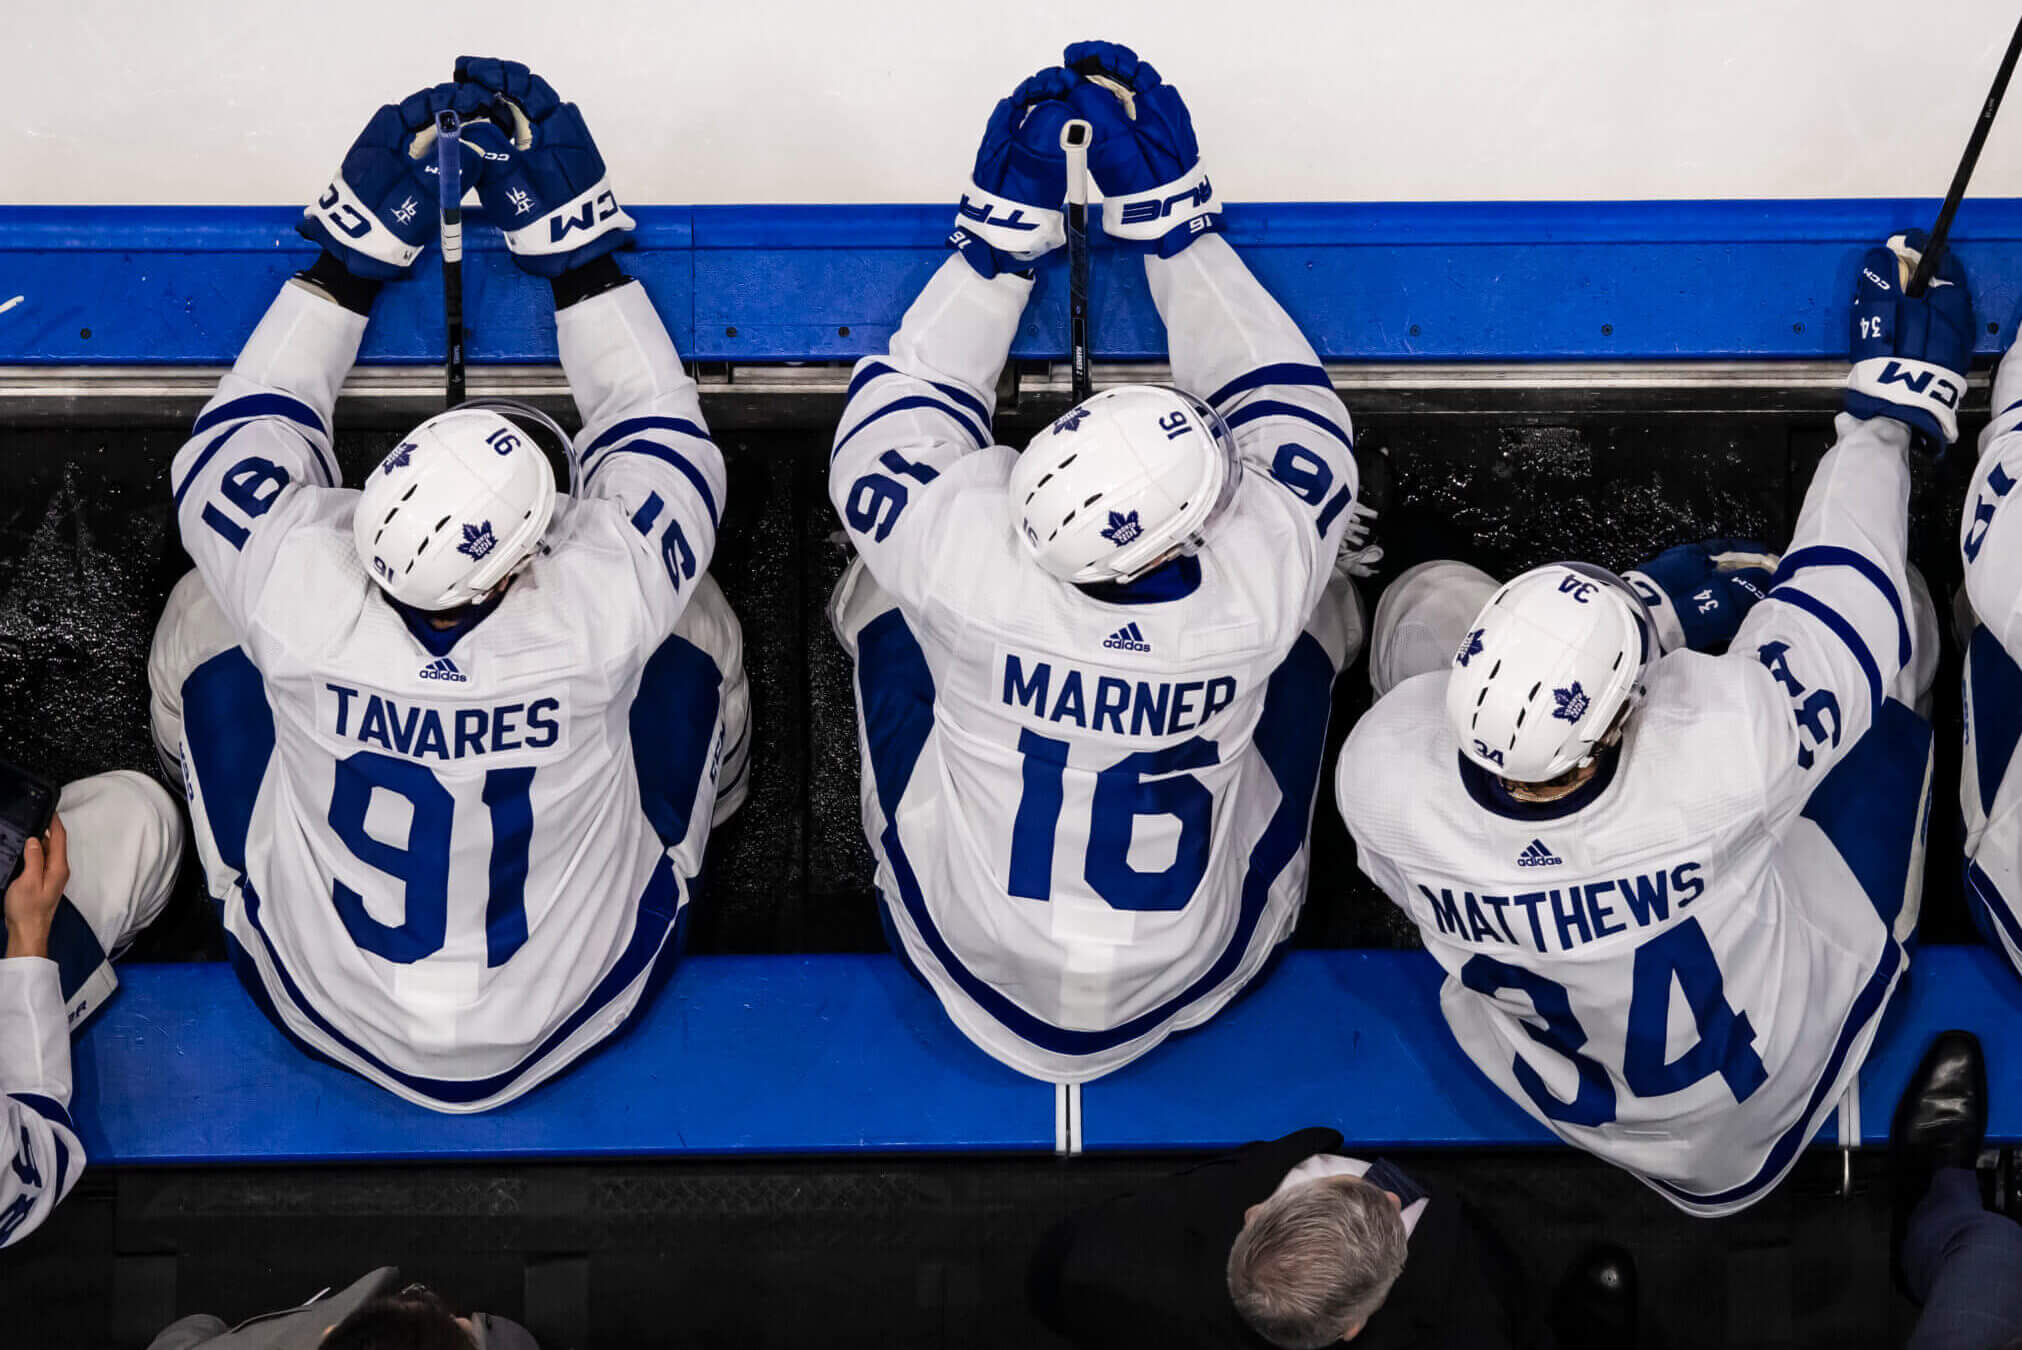 The Maple Leafs changed the way they play in the playoffs and lost because of it